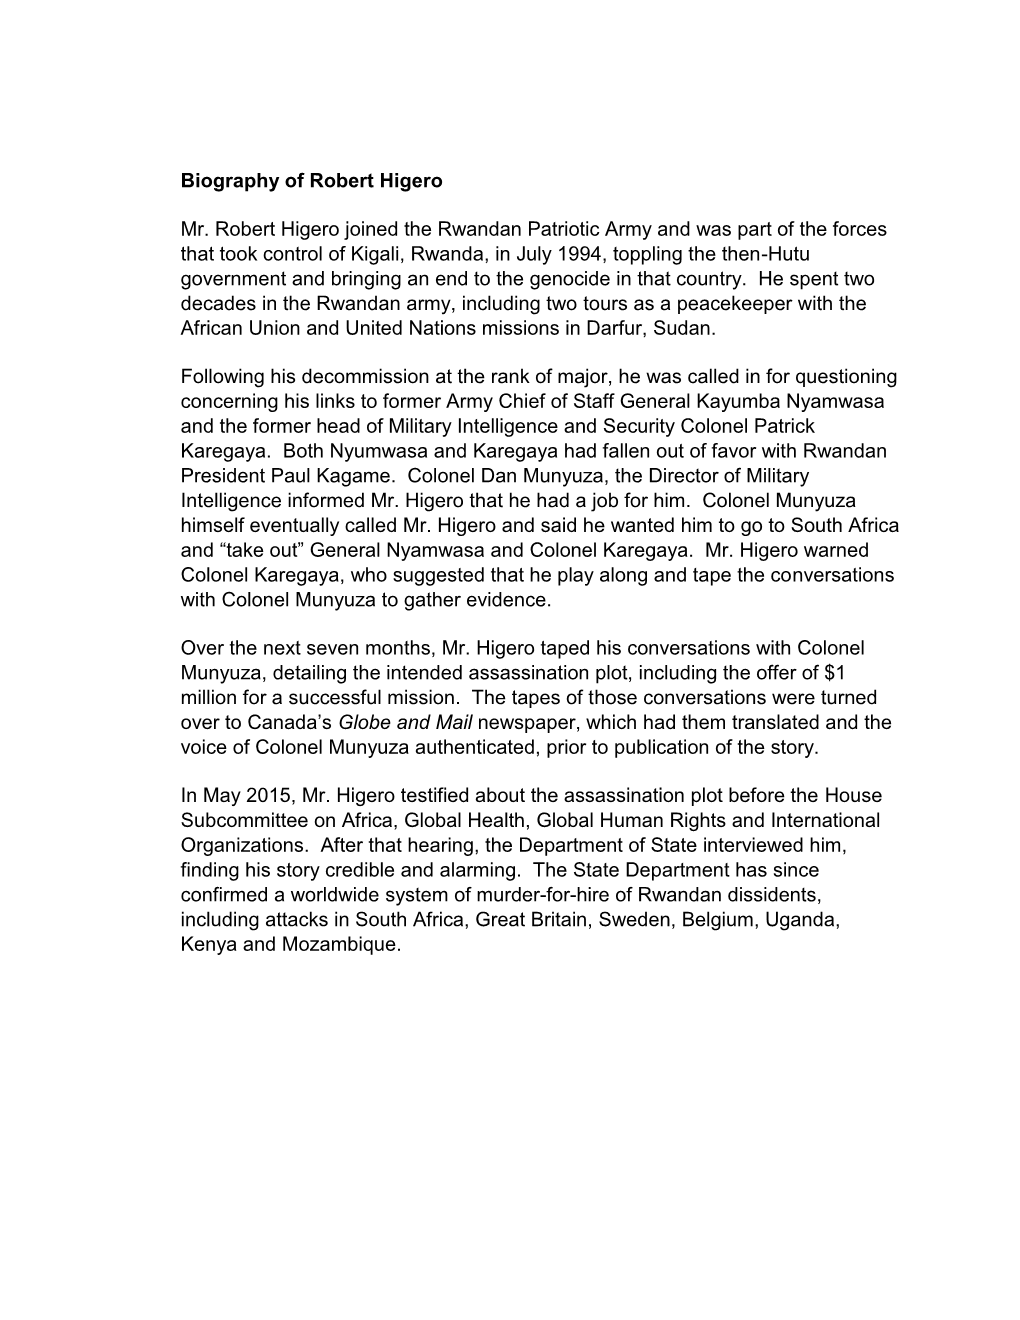 Biography of Robert Higero Mr. Robert Higero Joined the Rwandan Patriotic Army and Was Part of the Forces That Took Control of K